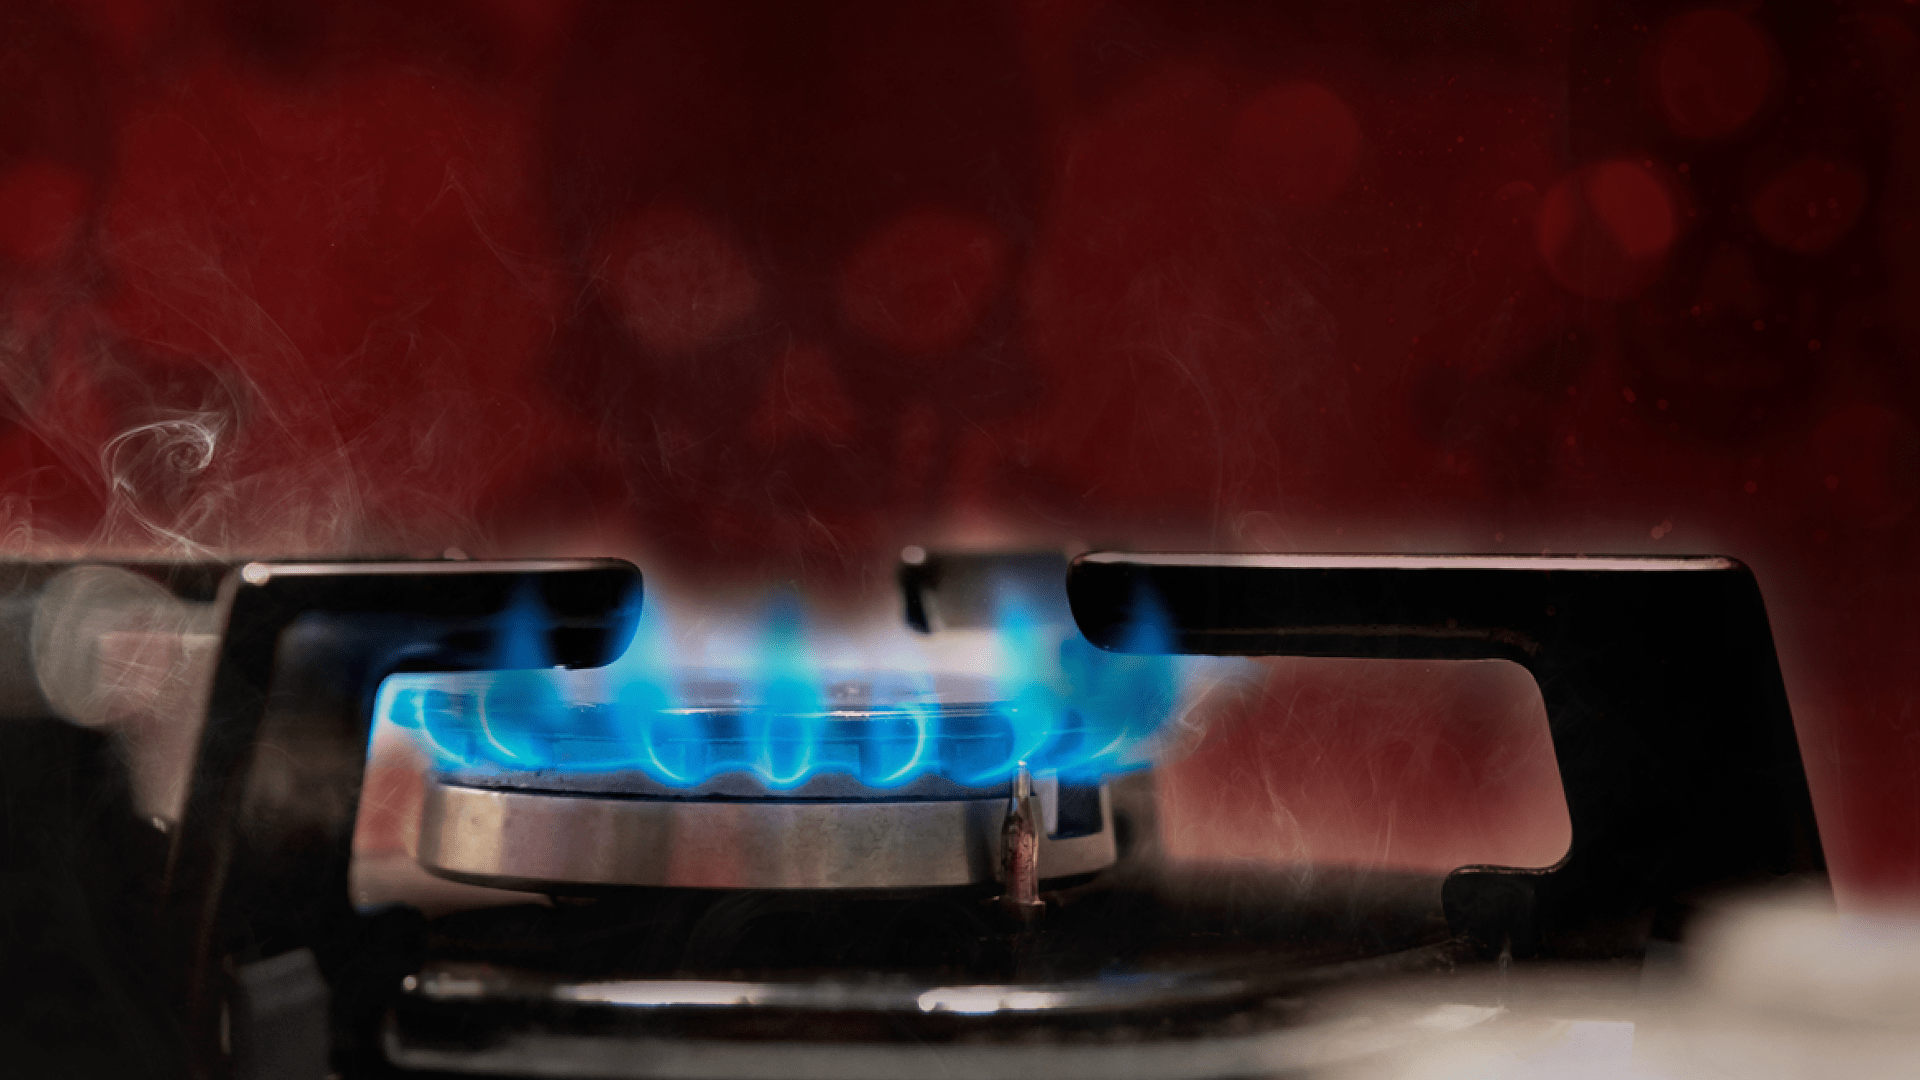 Your Gas Stove is Polluting Your Home